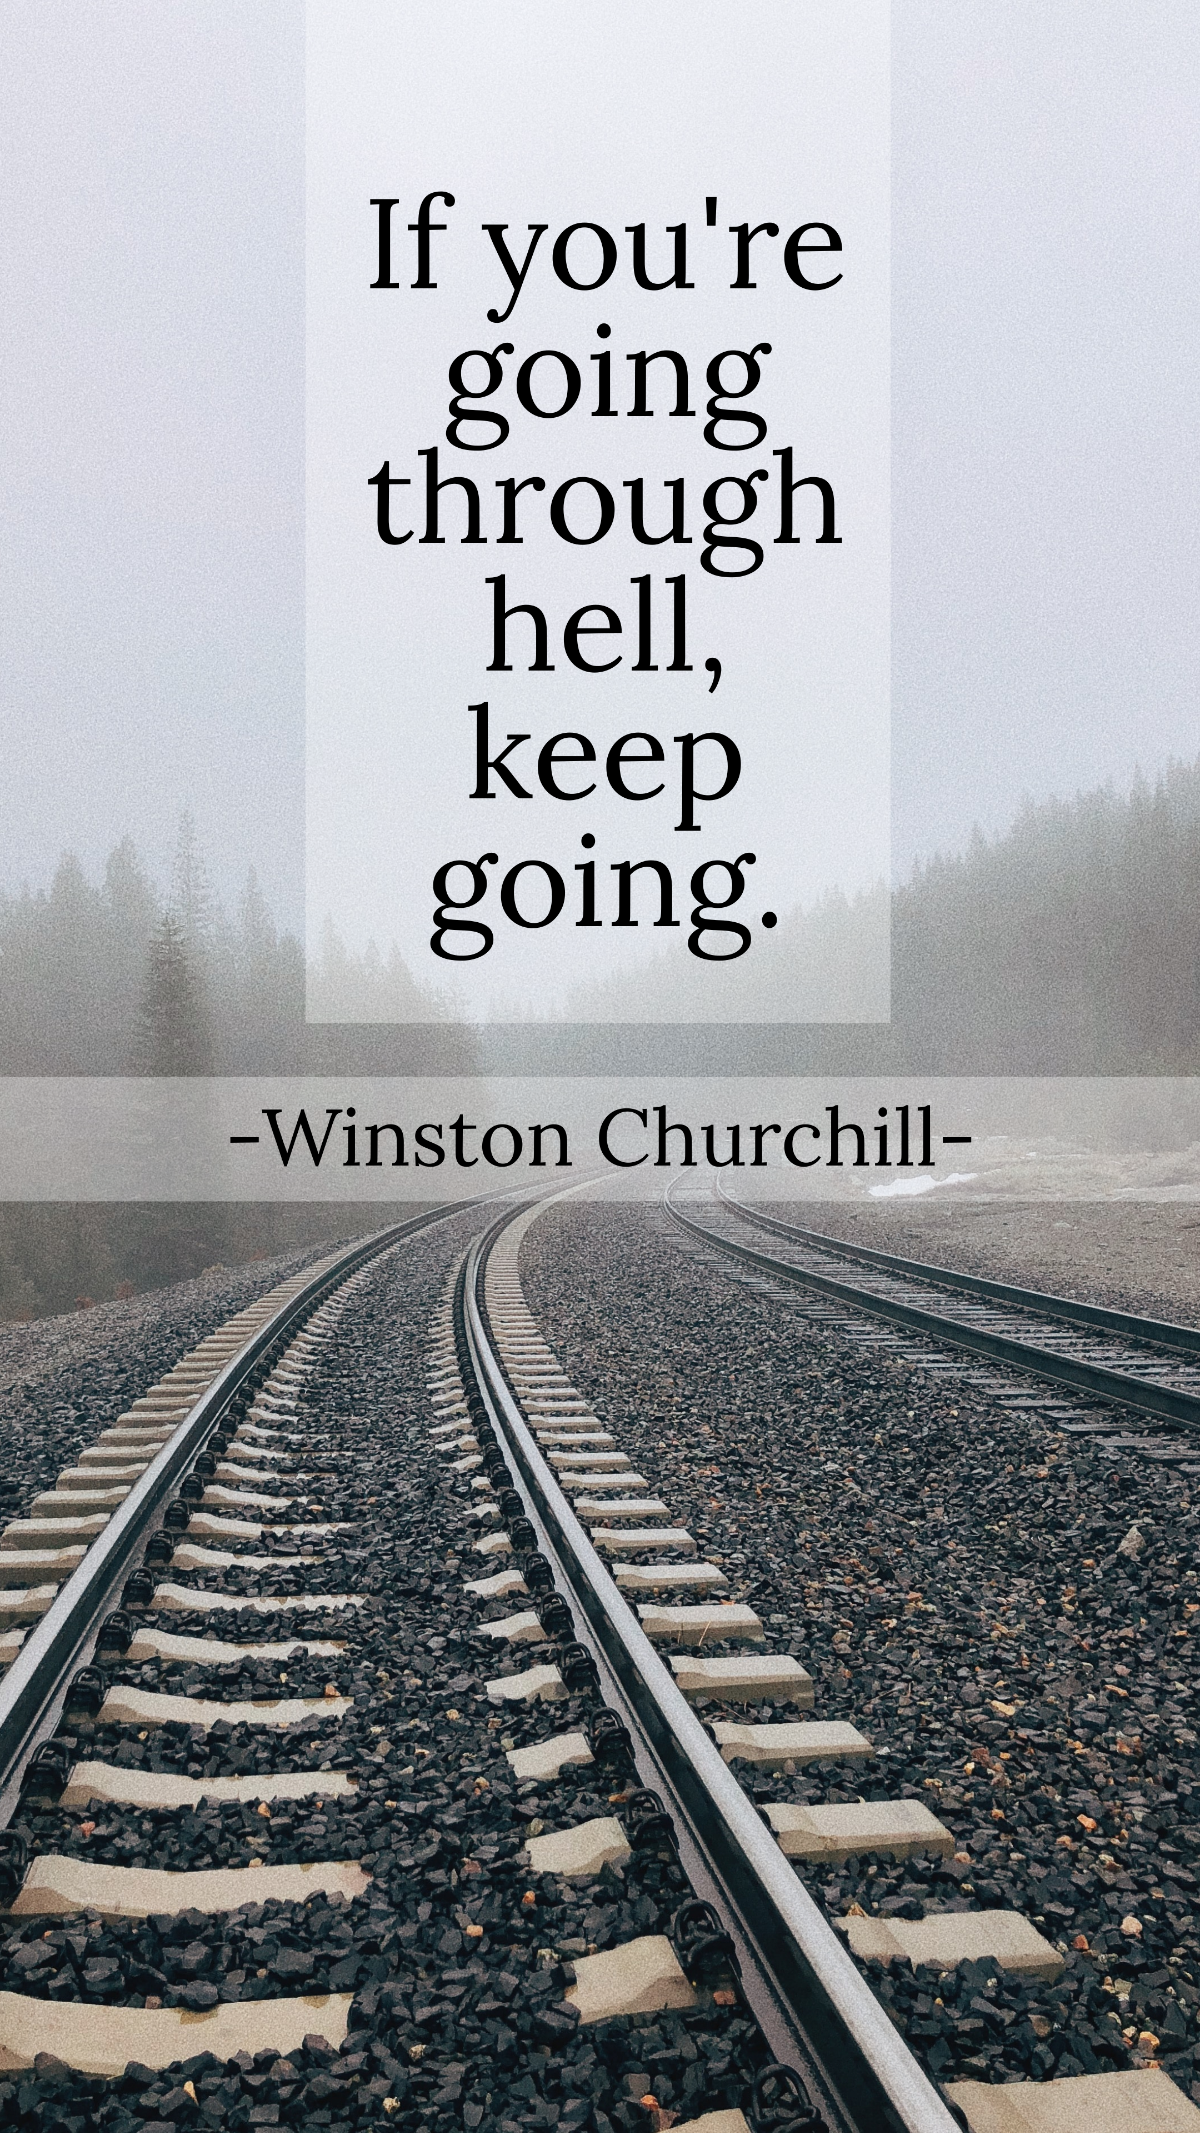 Winston Churchill - If you're going through hell, keep going. Template